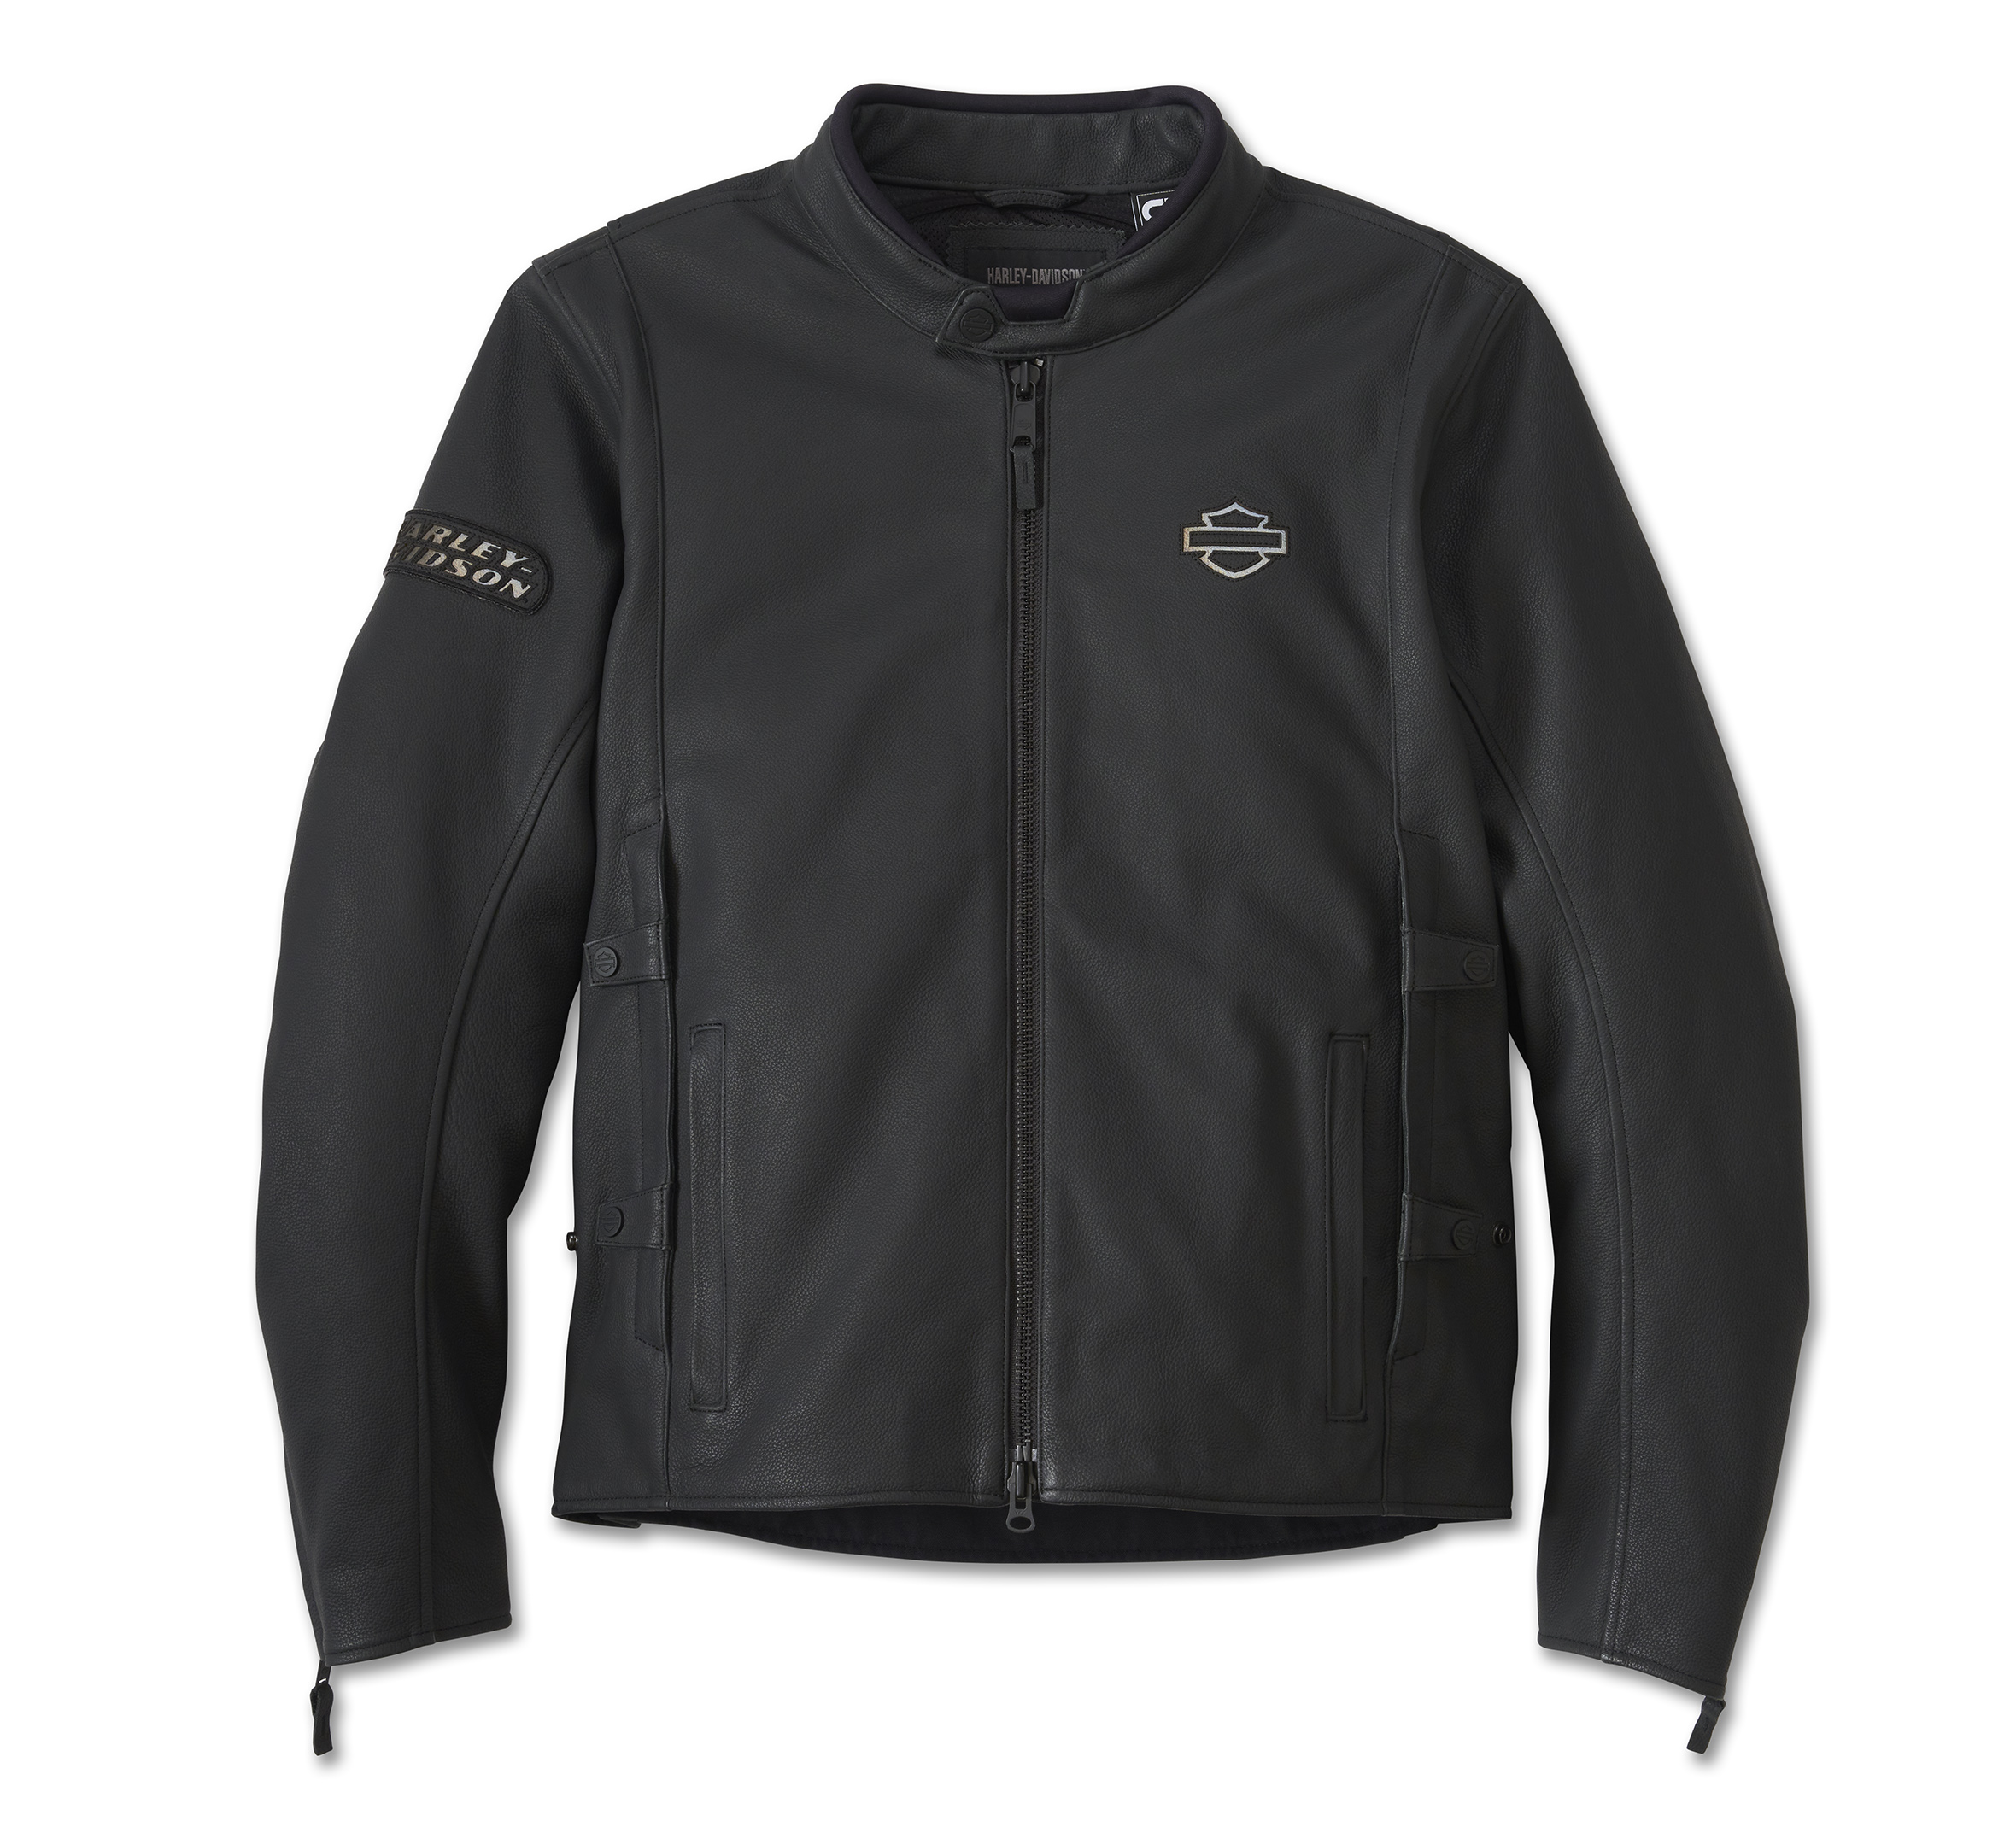 PRODUCT REVIEW: Harley-Davidson Auroral 3-in-1 Leather Jacket - Cycle News